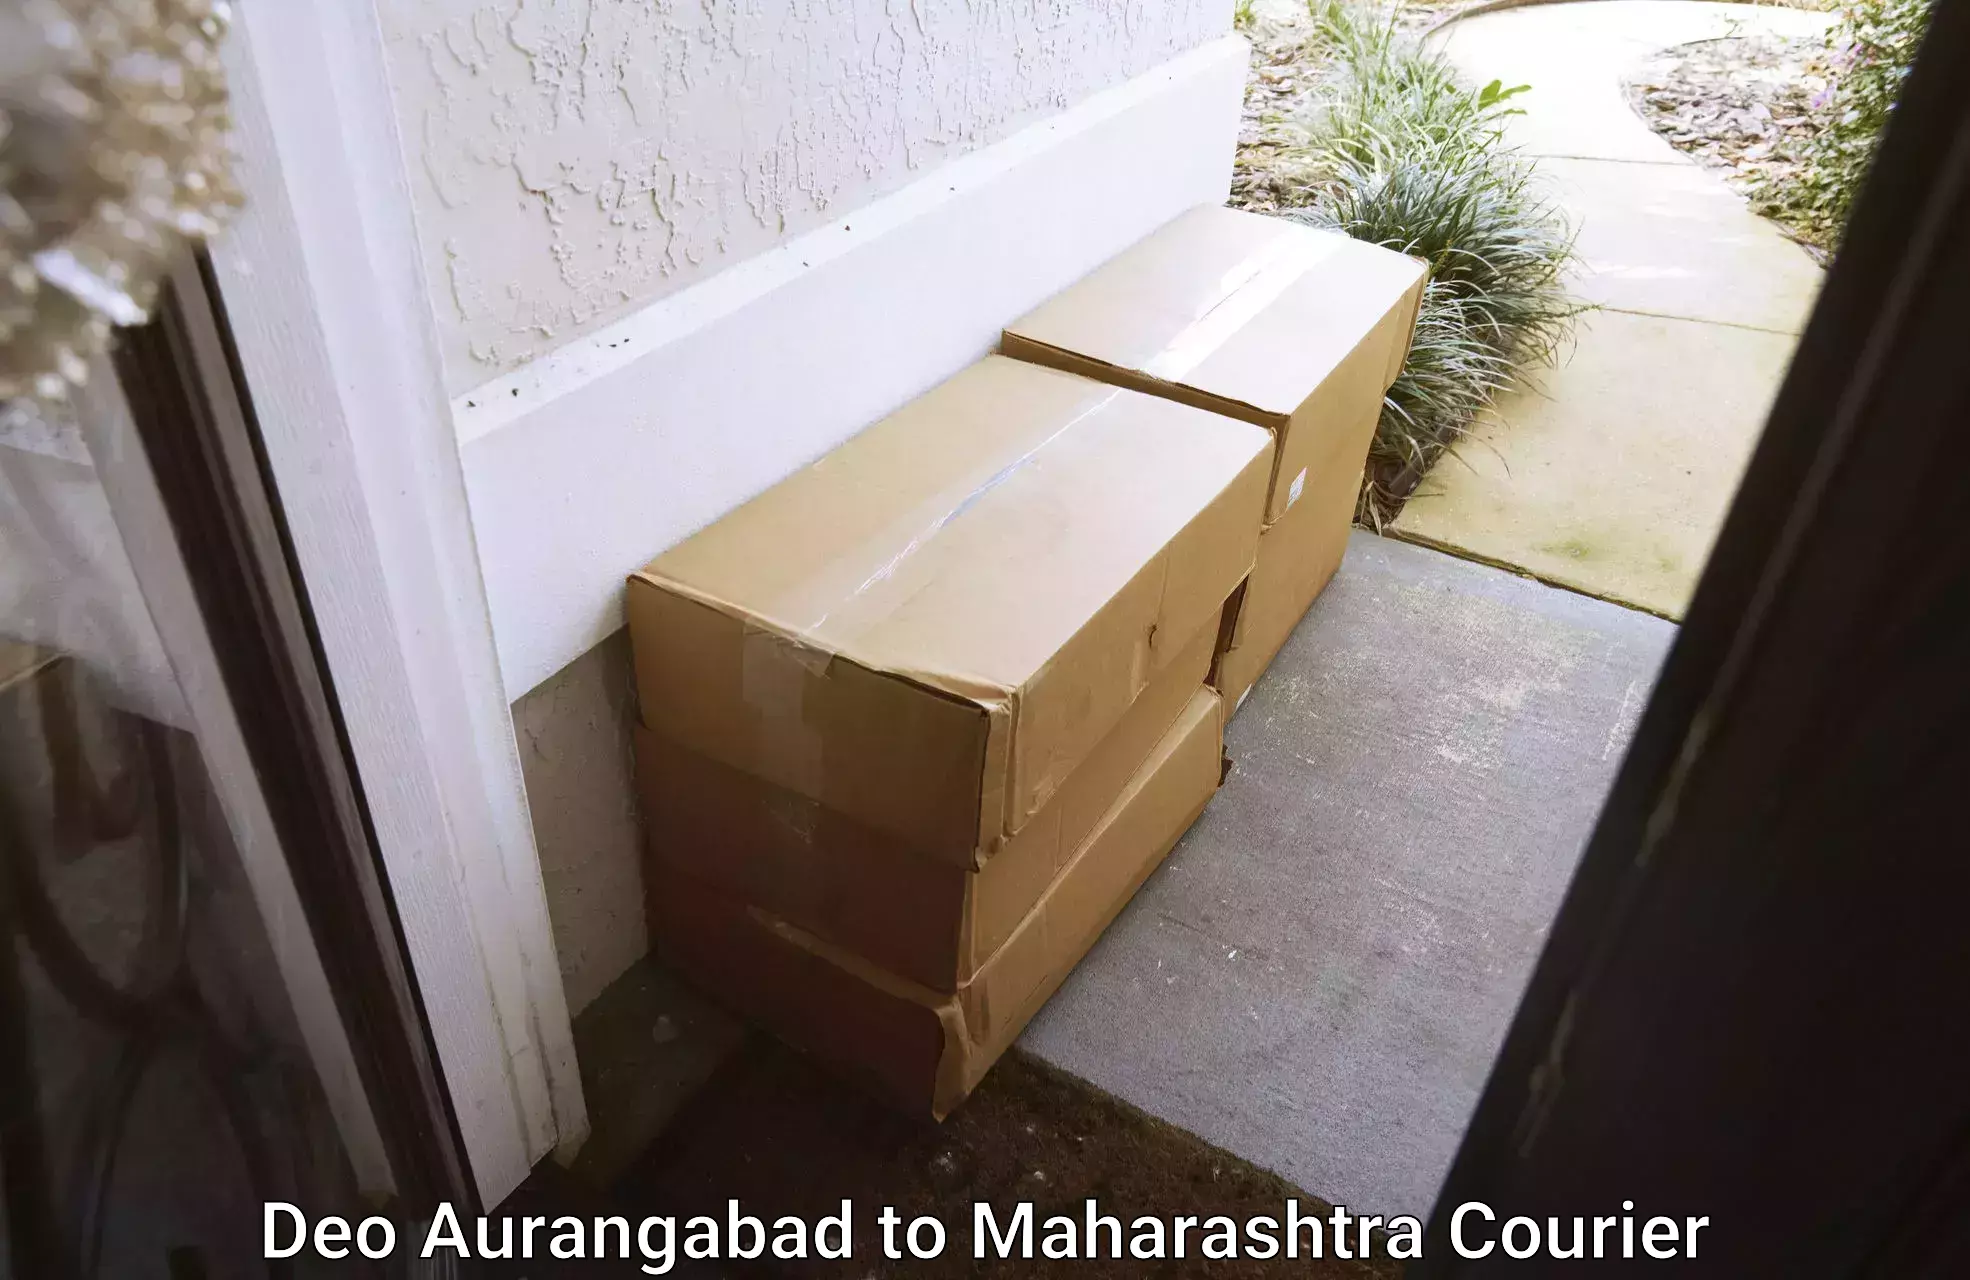 Professional moving company Deo Aurangabad to Khed